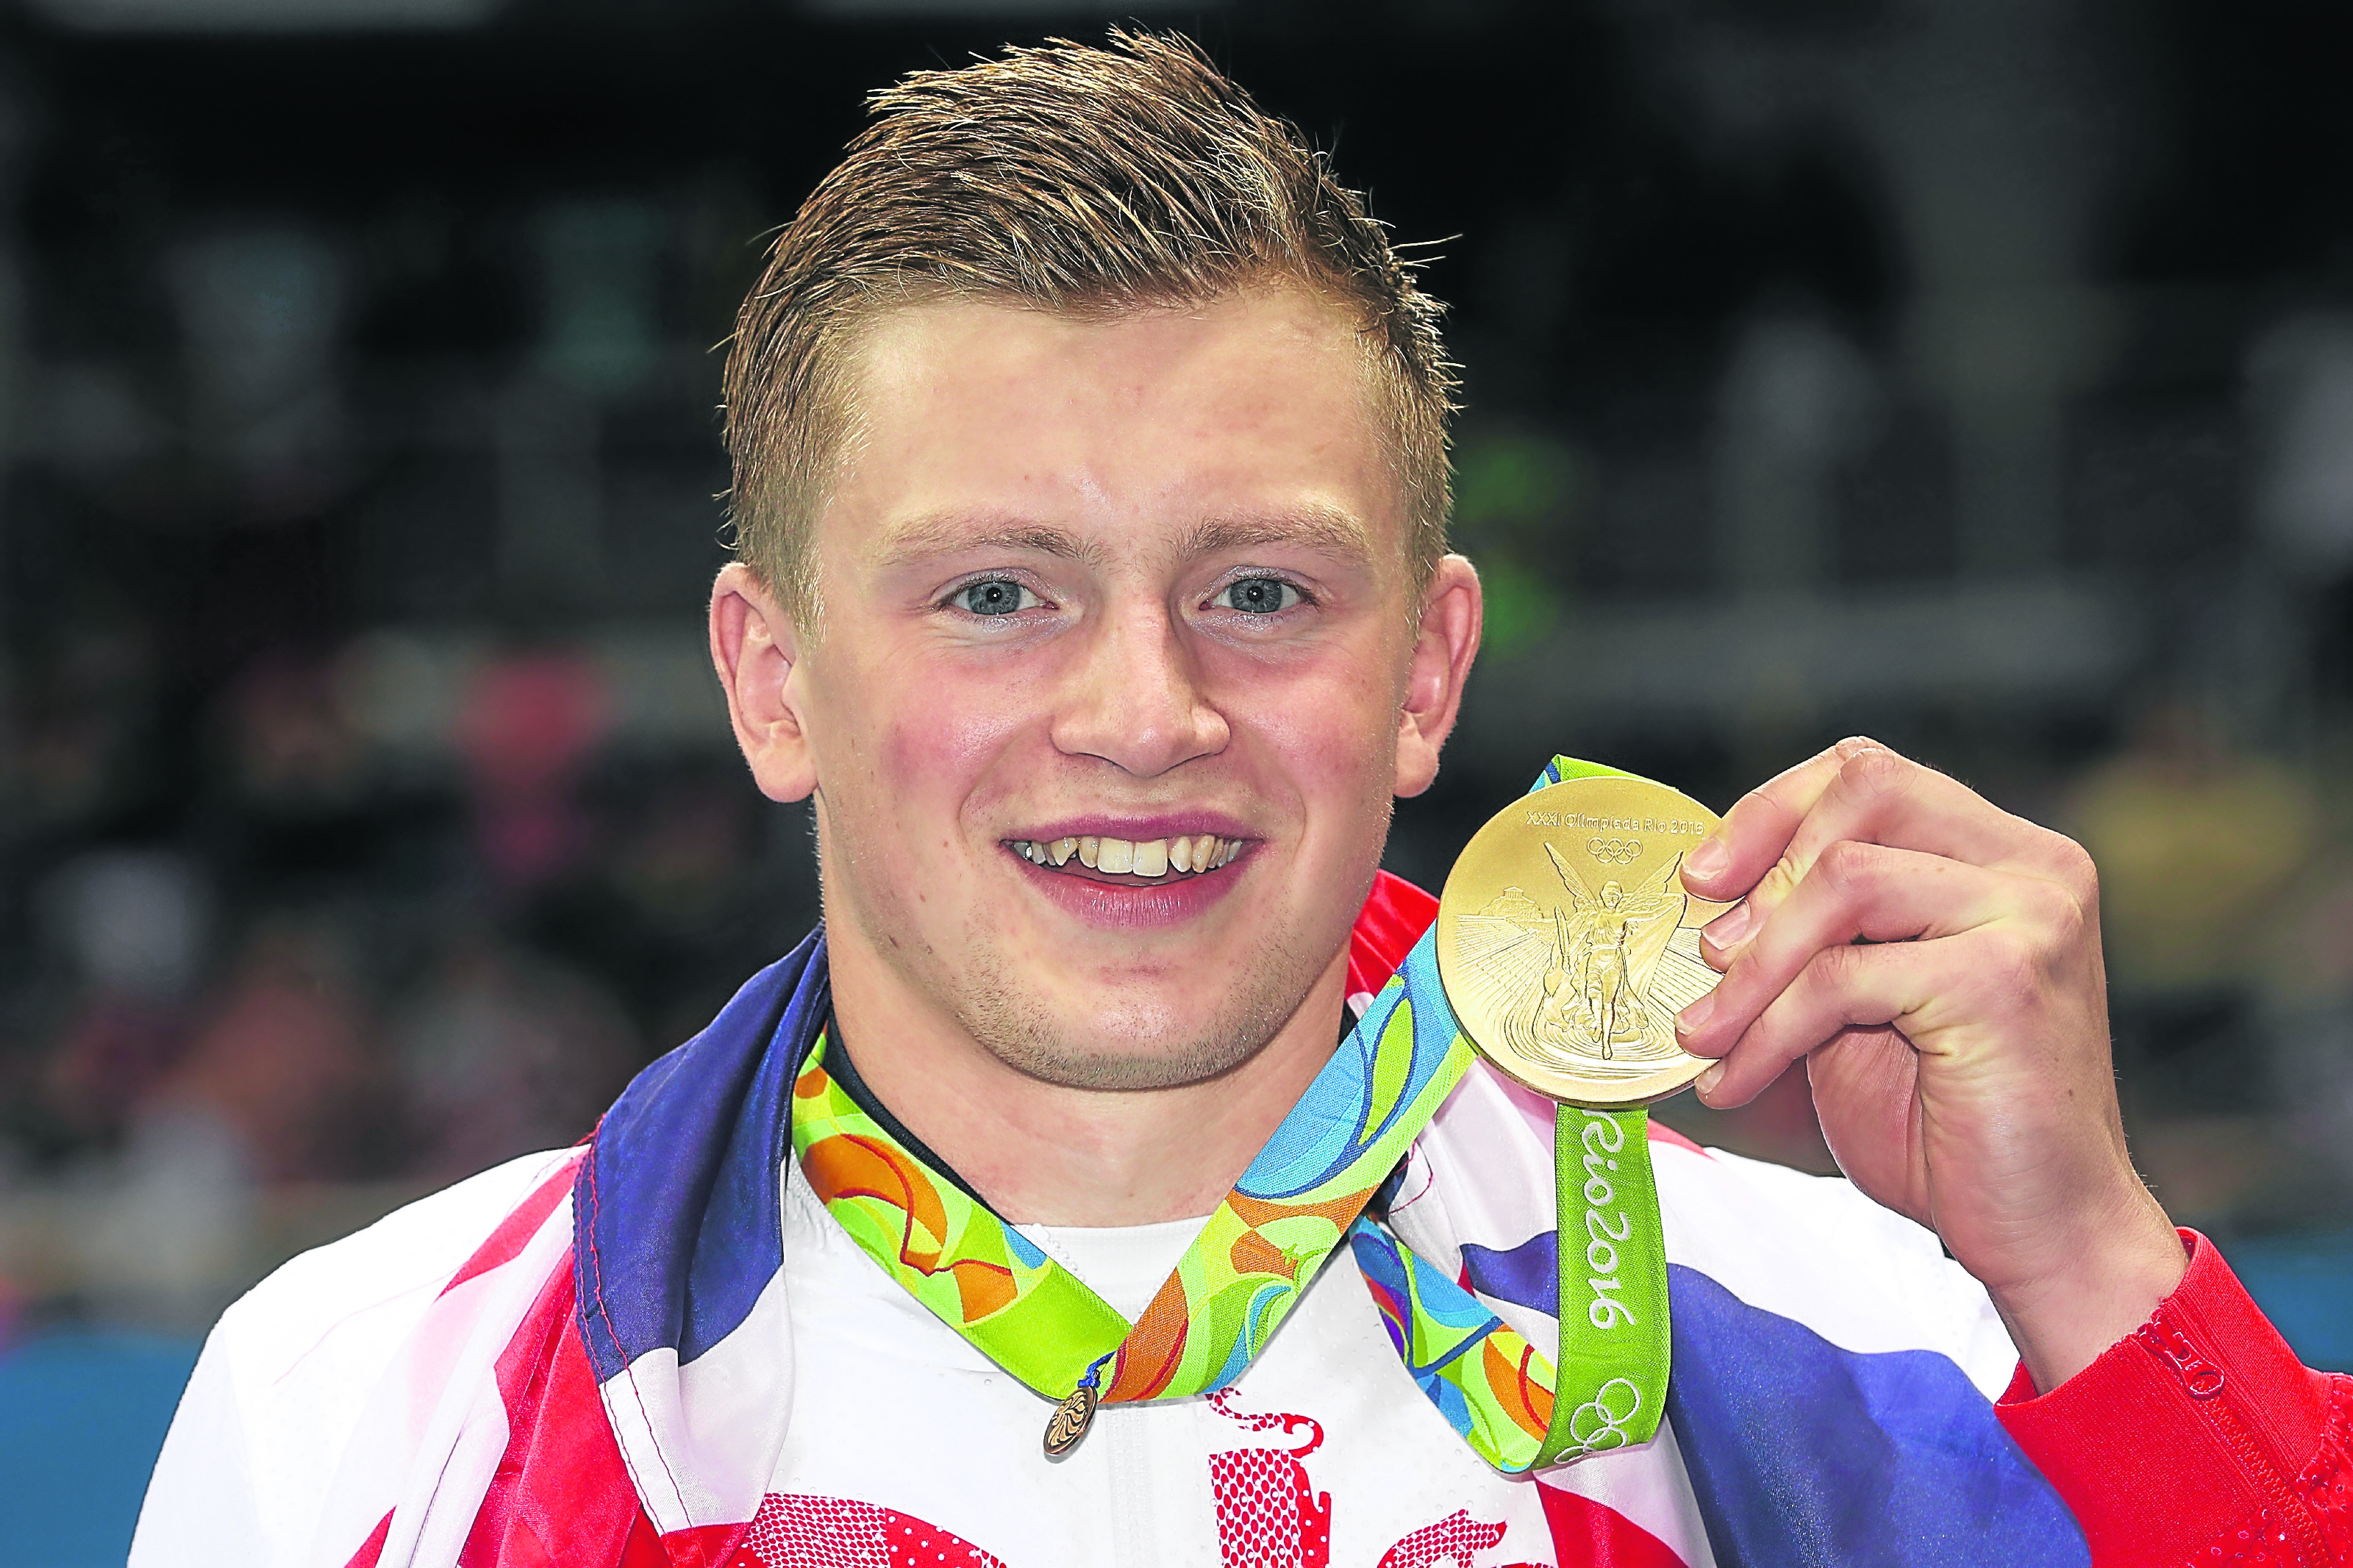 Gold medallist Adam Peaty of Great Britain poses during the medal ceremony for the Men's 100m Breaststroke Final (Photo by Julian Finney/Getty Images)